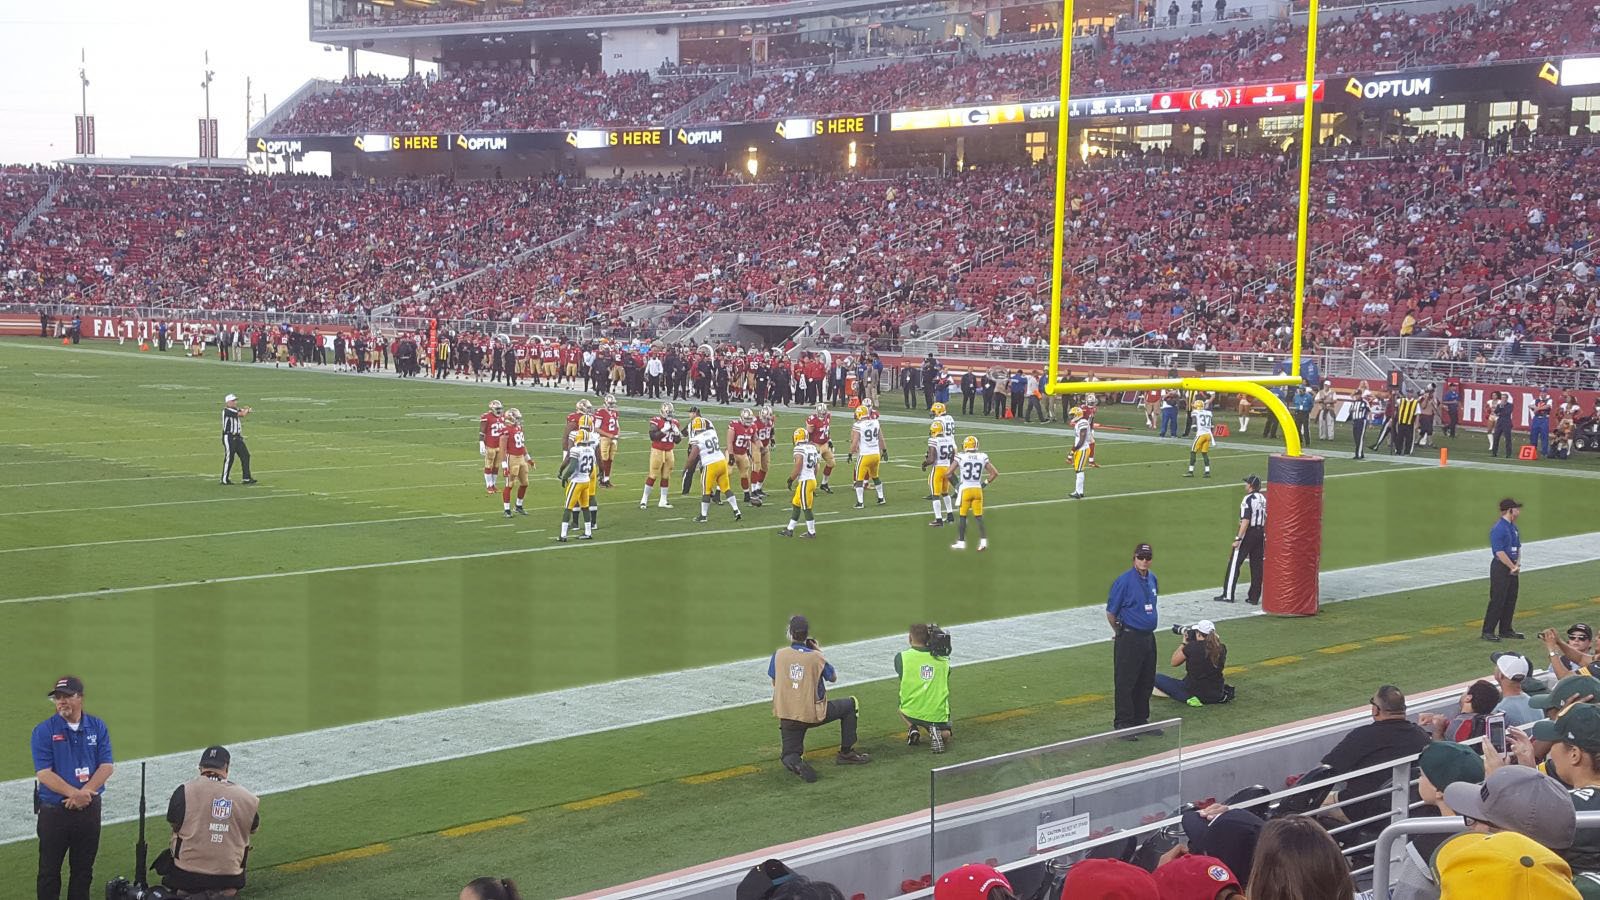 section 105, row 7 seat view  - levi